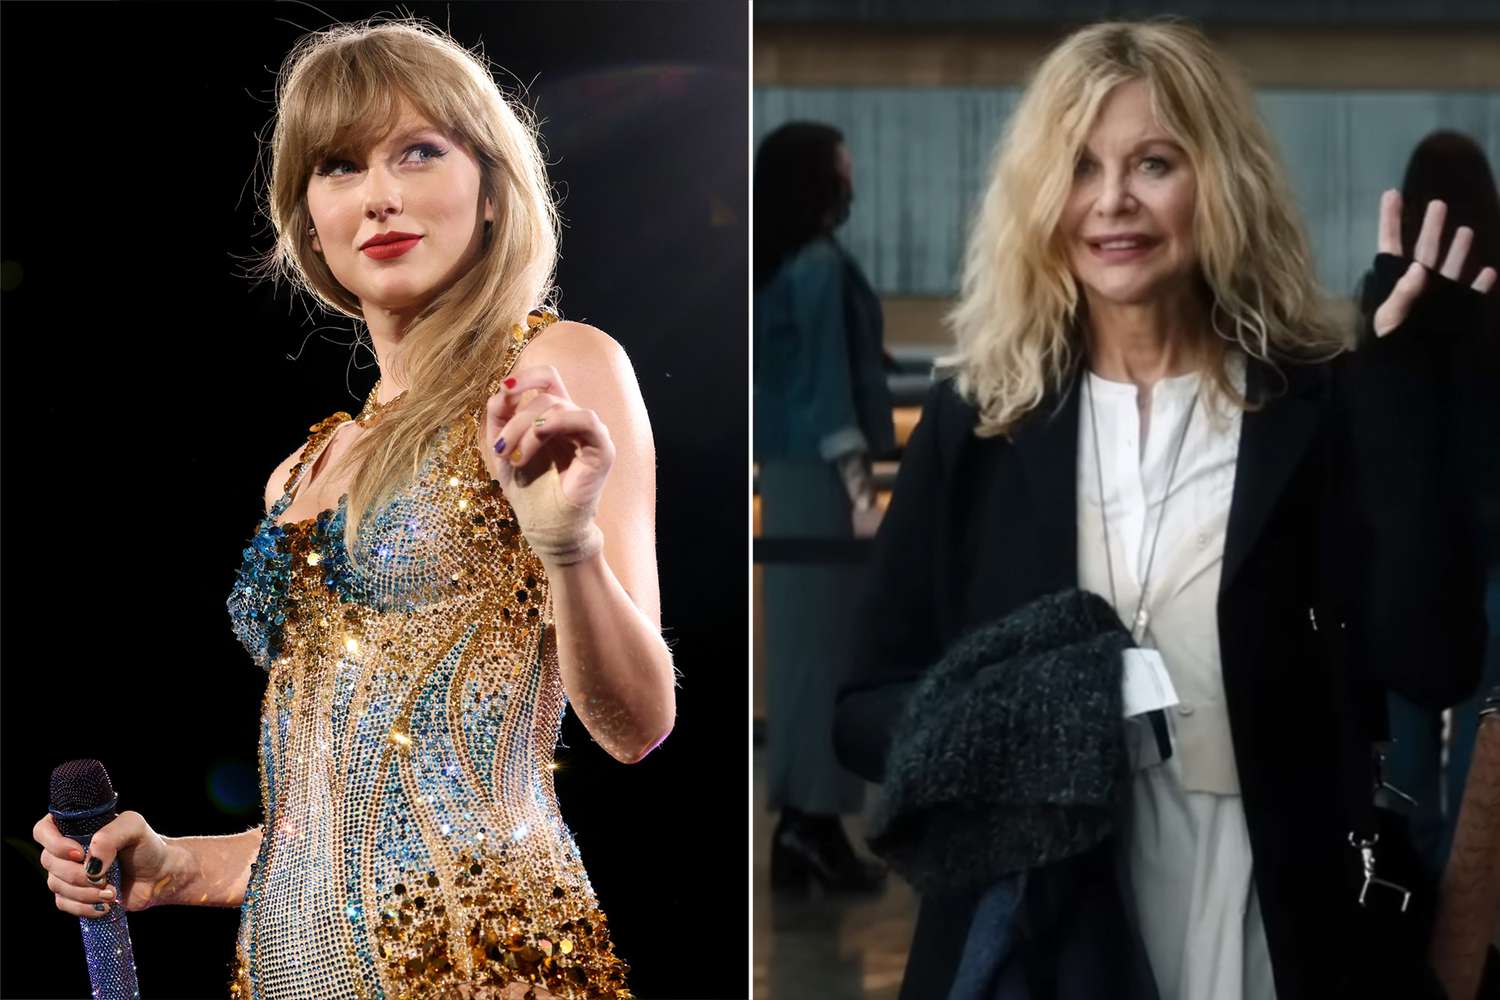 Taylor Swift 'Eras Tour' movie causes Meg Ryan rom-com 'What Happens Later' to premiere…later